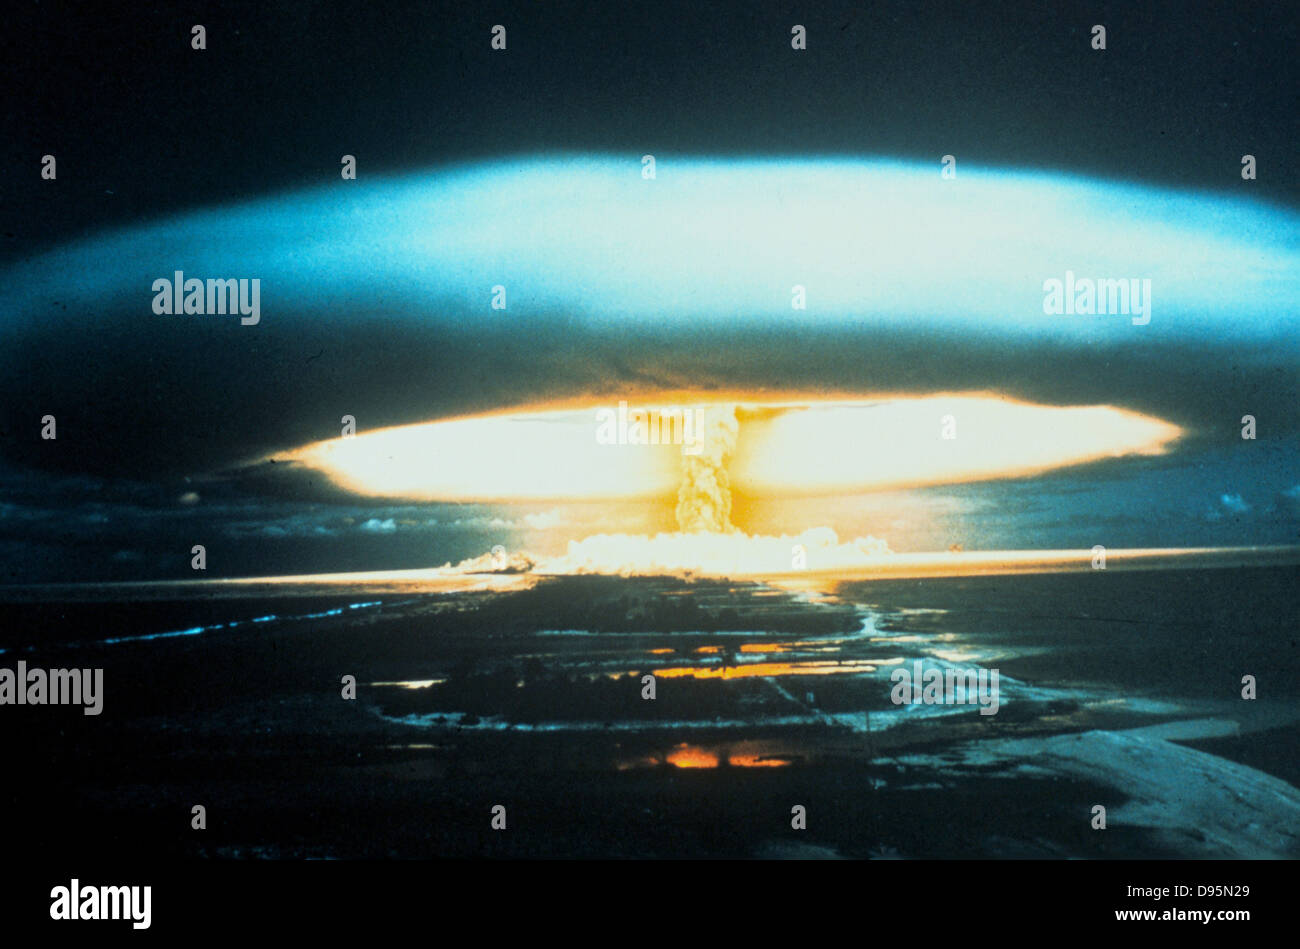 150-megaton thermonuclear explosion, Bikini Atoll, l March 1854. Unexpected spread of fallout led to awareness of, and research into, radioactive pollution.  UNO photograph. Stock Photo